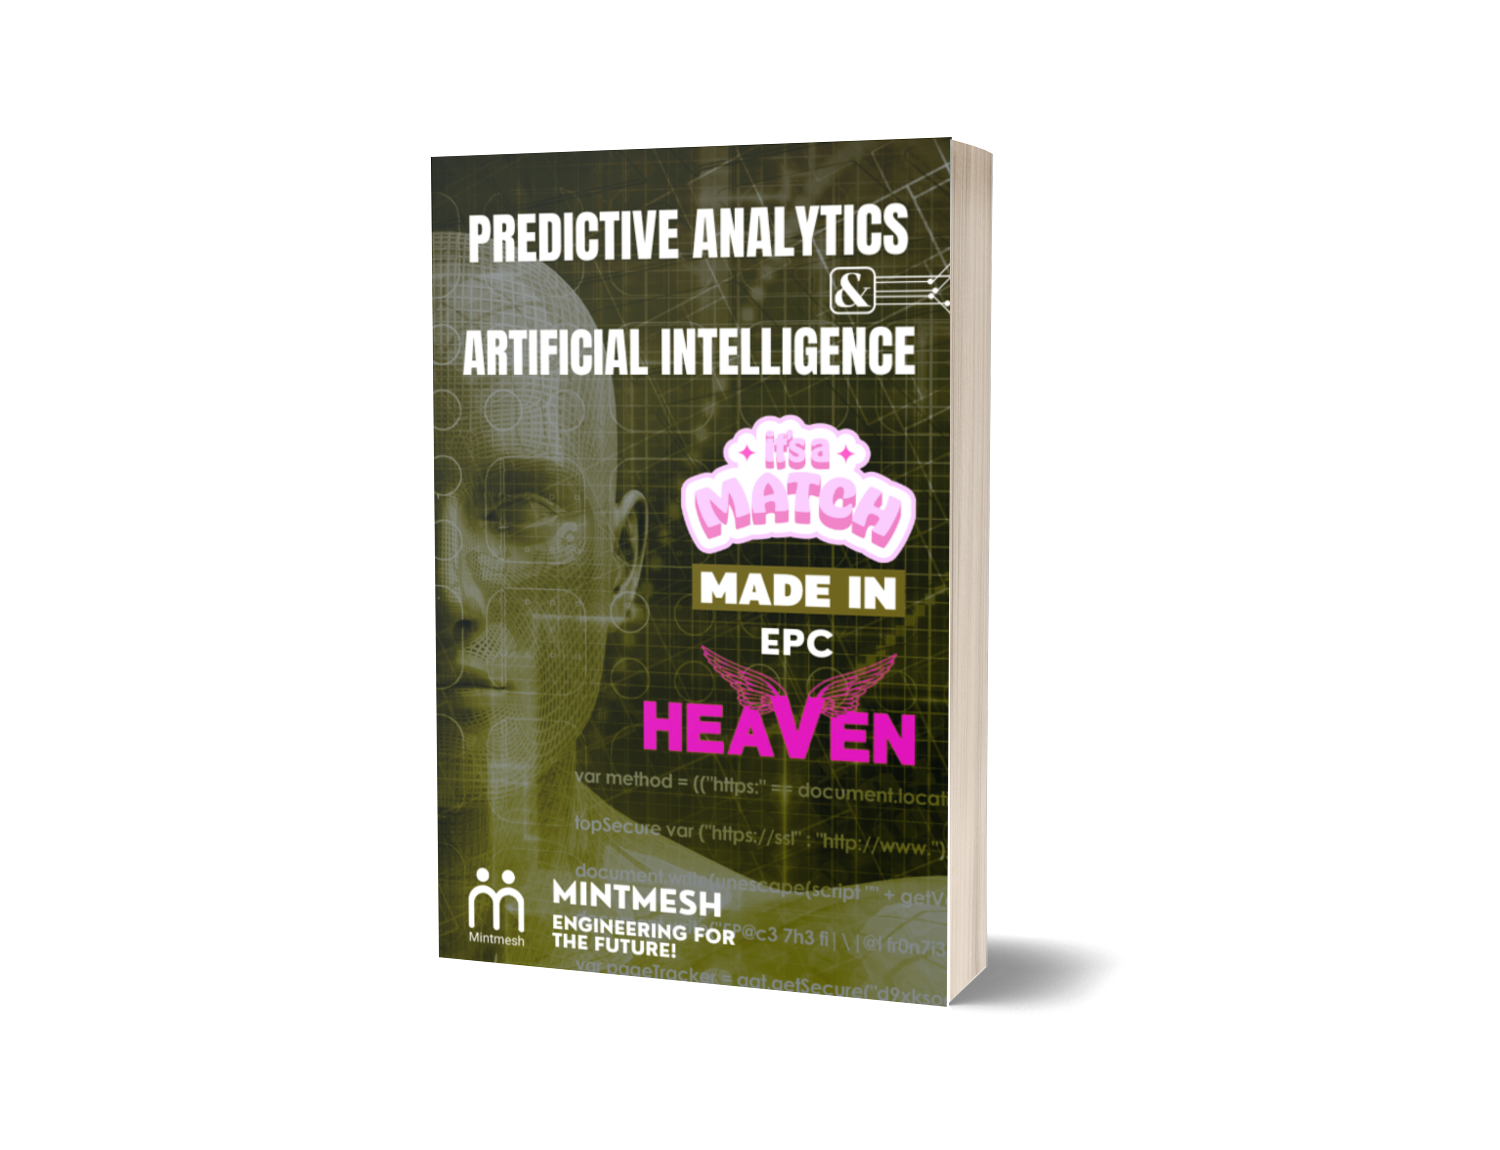 E-book: Predictive Analytics and Artificial Intelligence a match made in EPC heaven